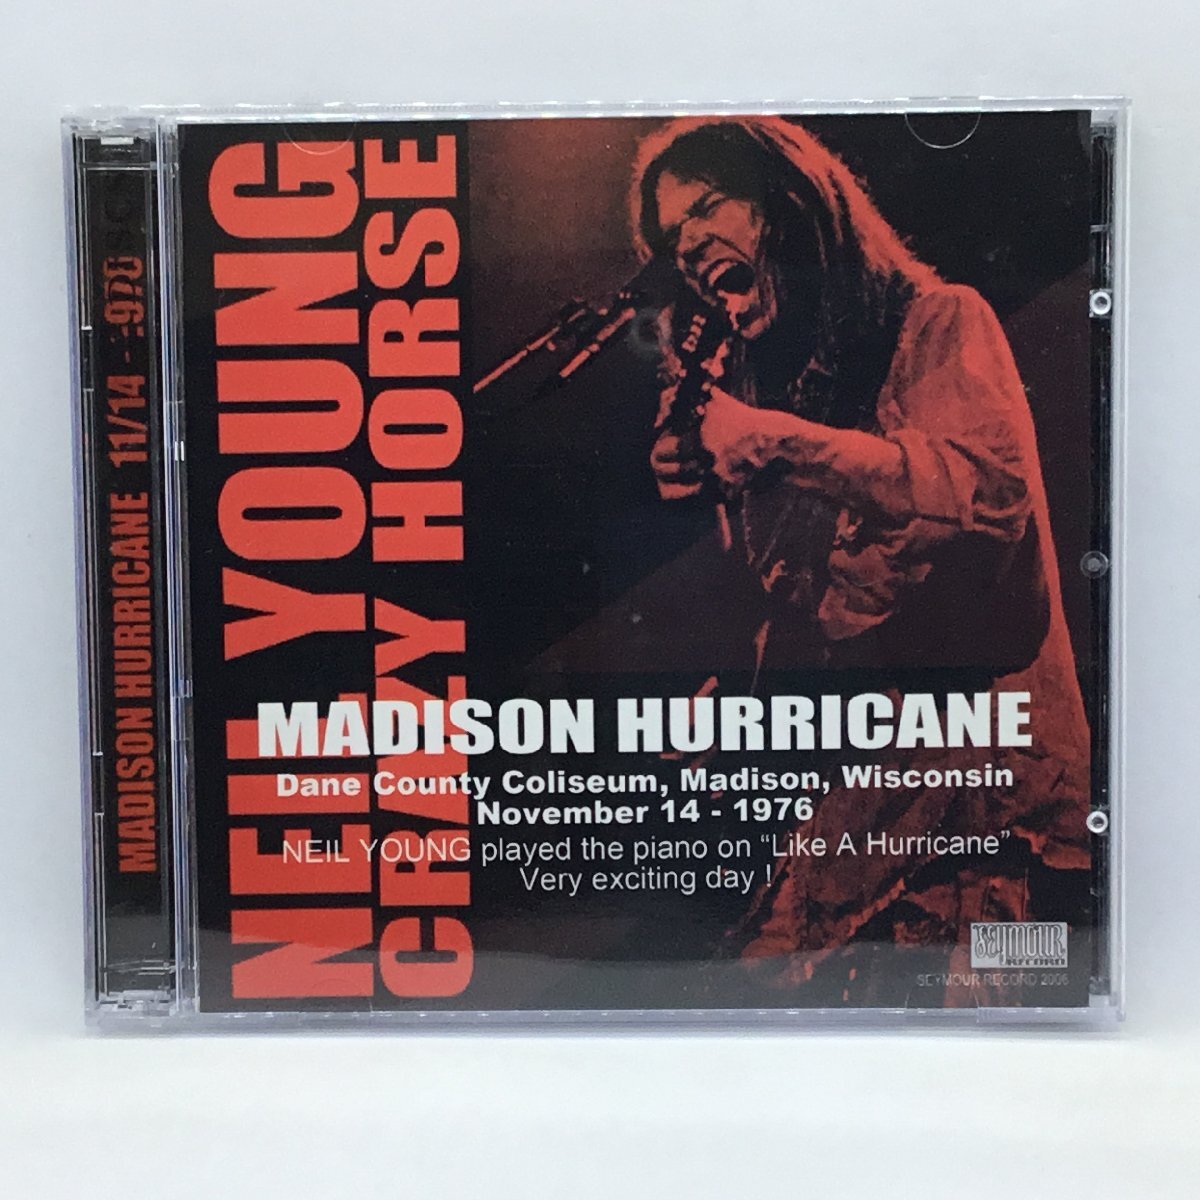  Neal * Young &k Lazy * шланг / Madison * Hurricane (2CD) SR-012 013 NEIL YOUNG & CRAZY HORSE / MADISON HURRICANE